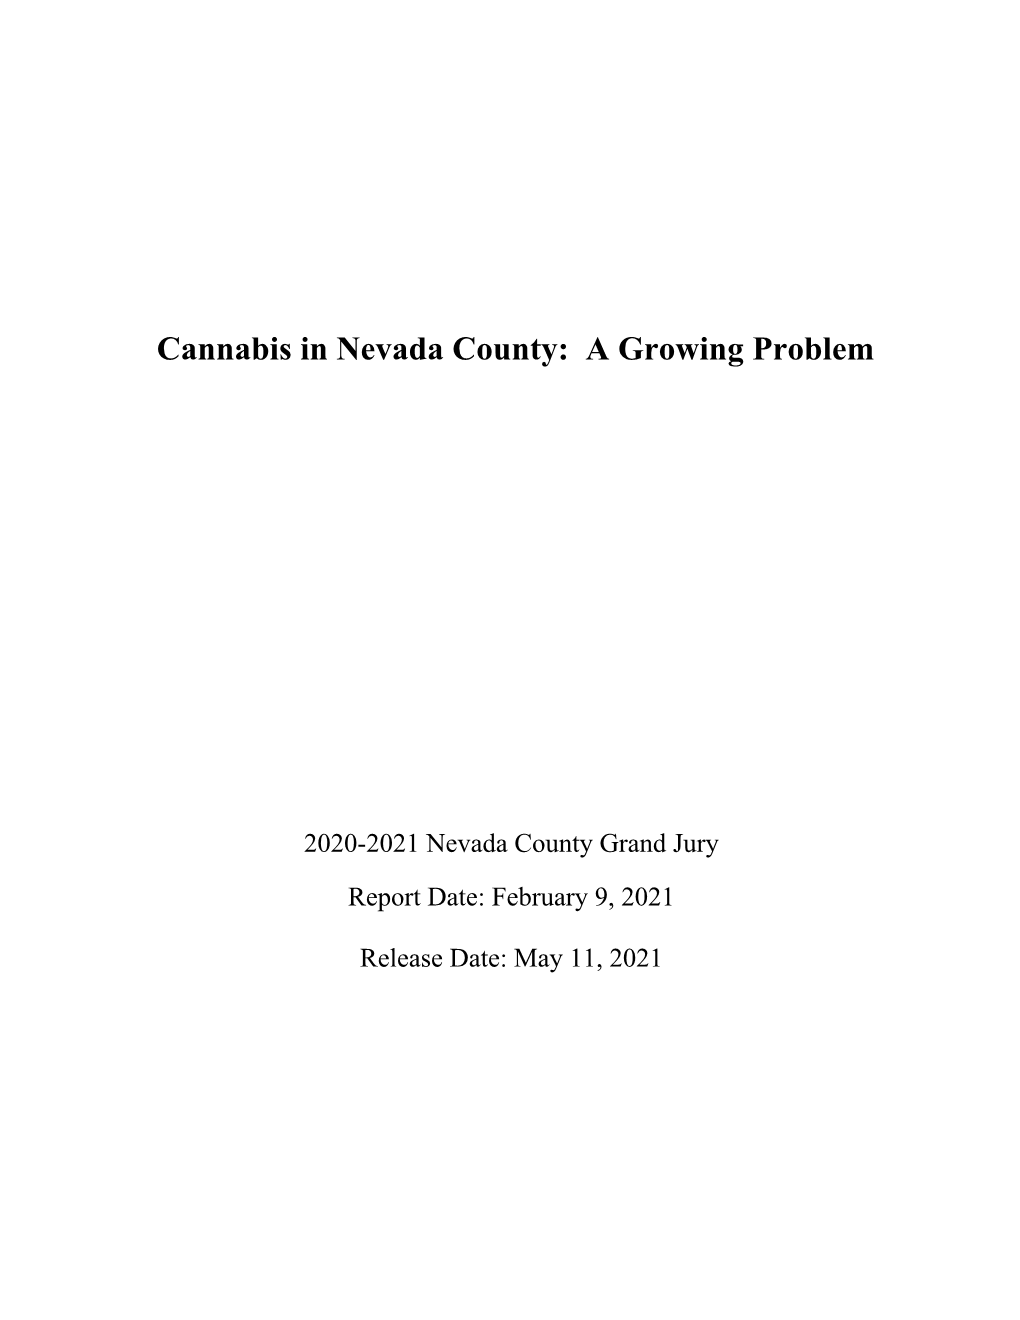 Cannabis in Nevada County: a Growing Problem